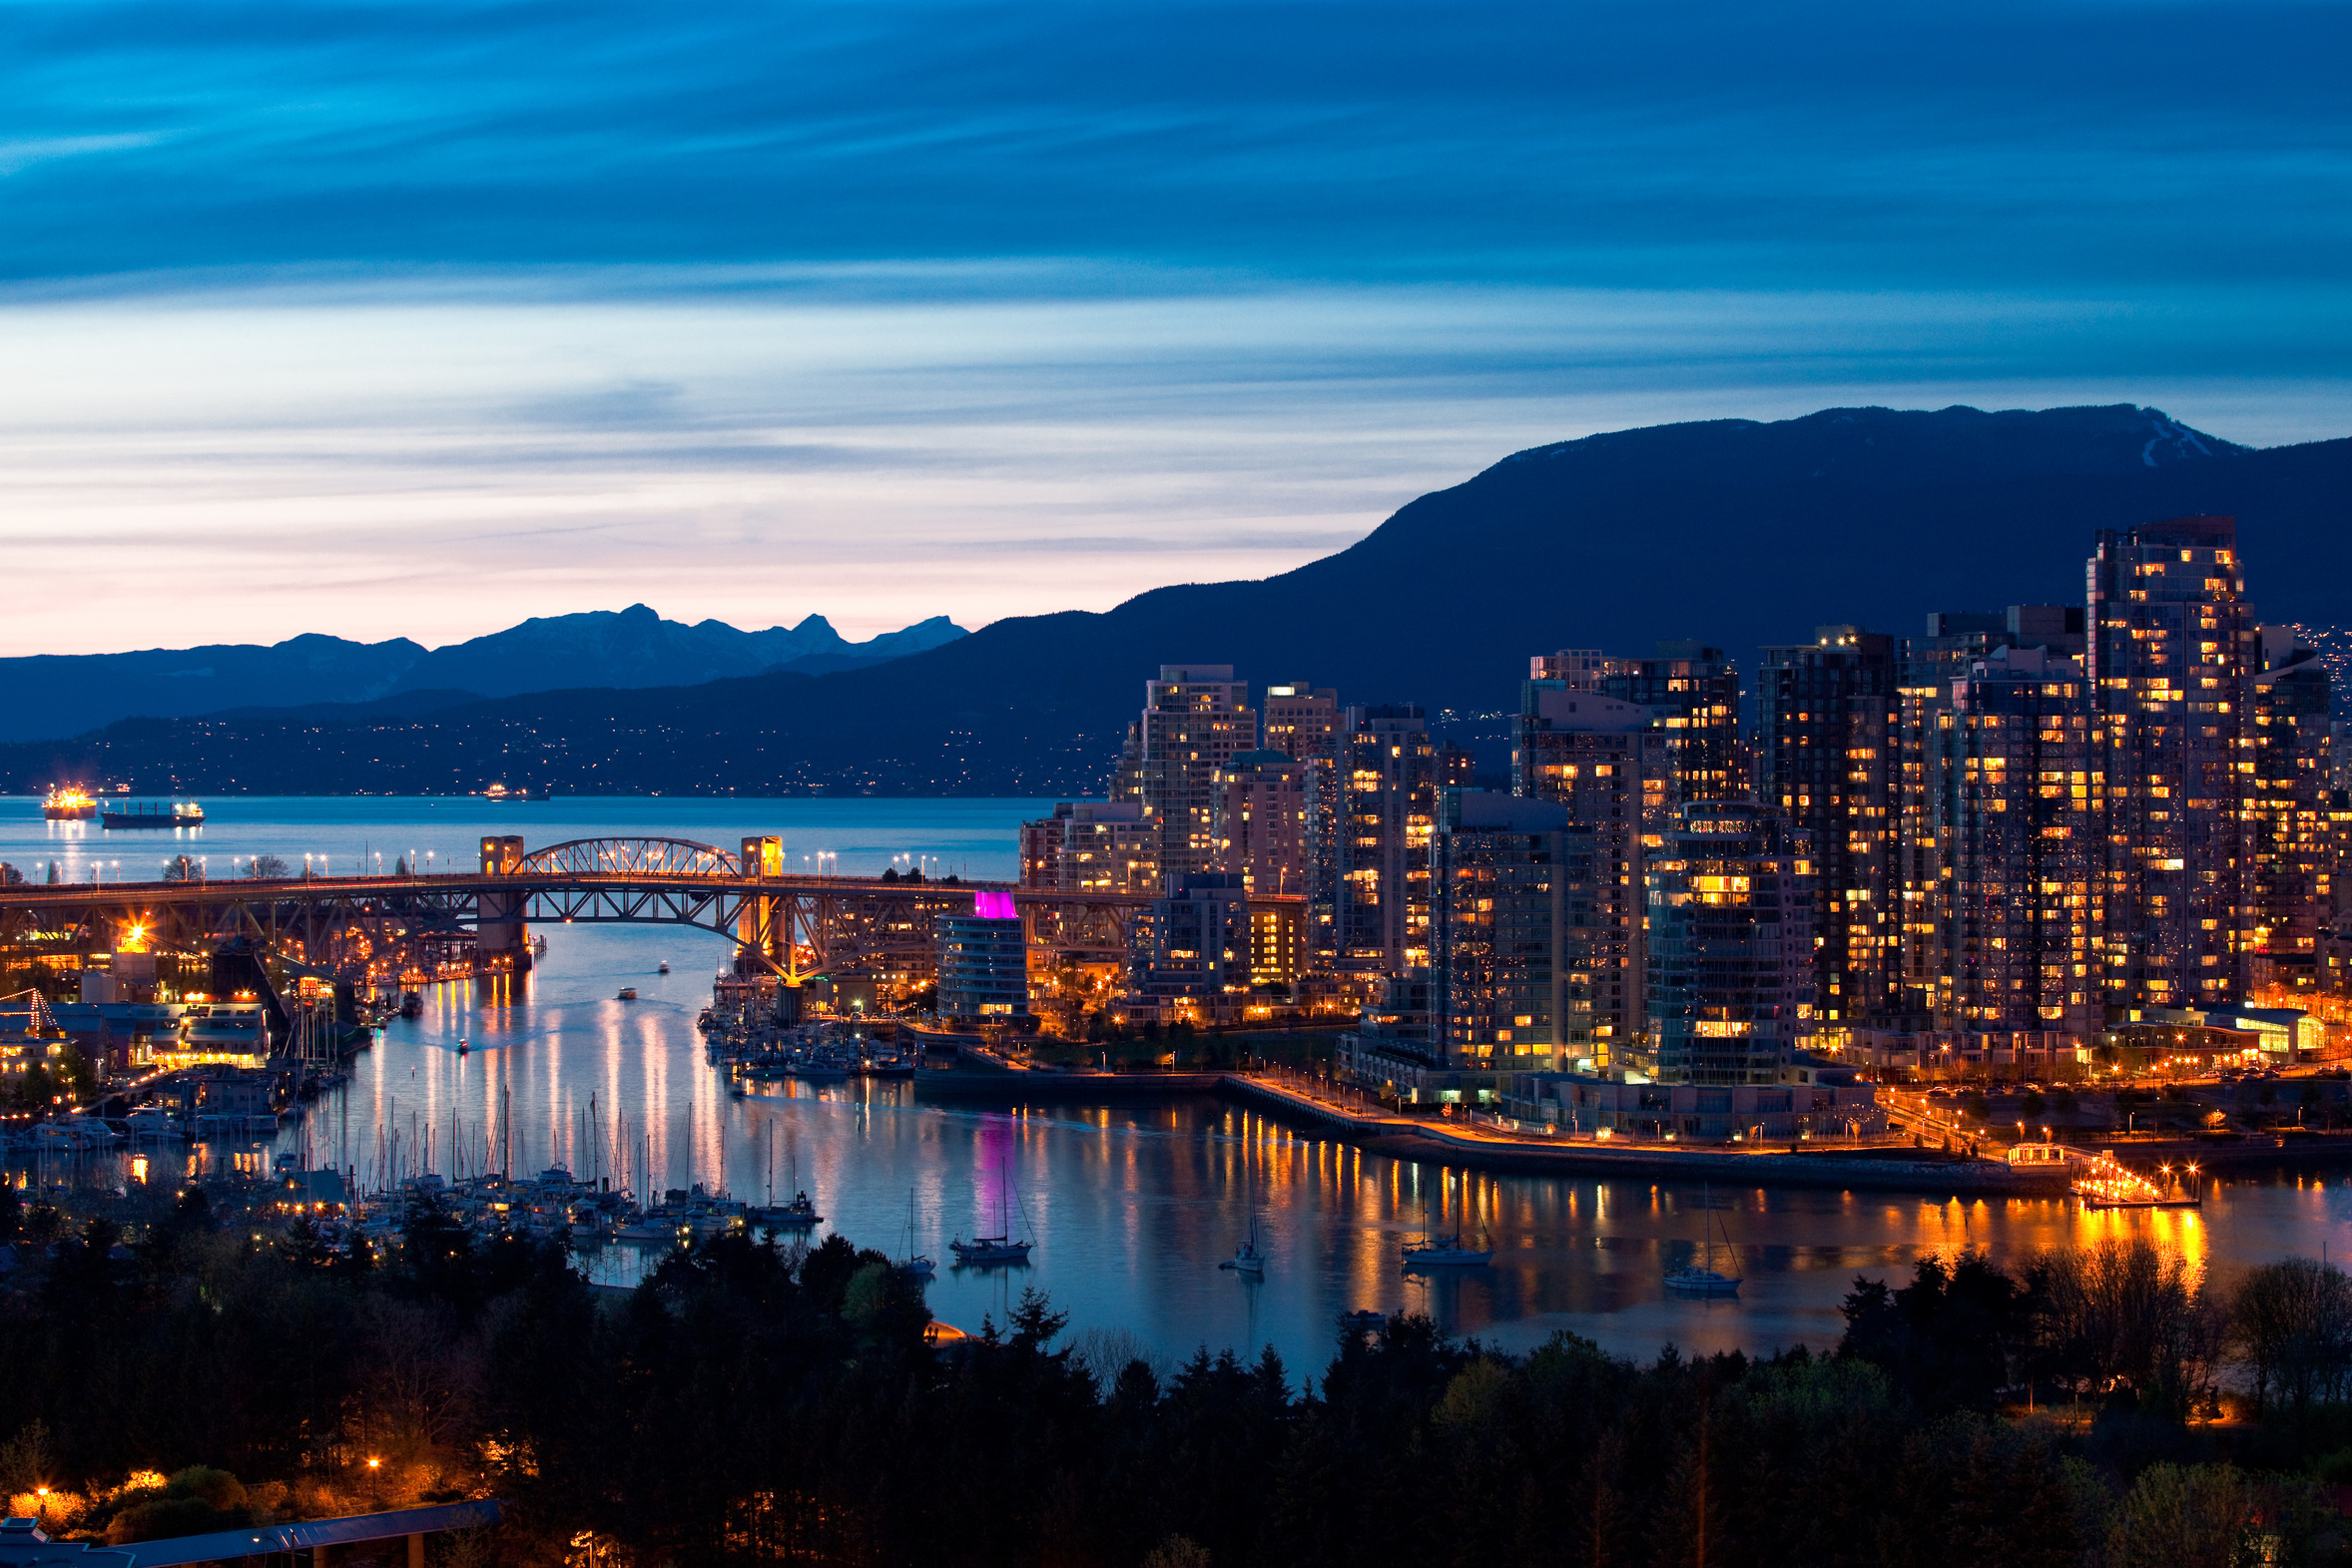 reflection, man made, night, vancouver, canada, cityscape, cloud, dusk, light, mountain, panorama, scenic, sky, cities